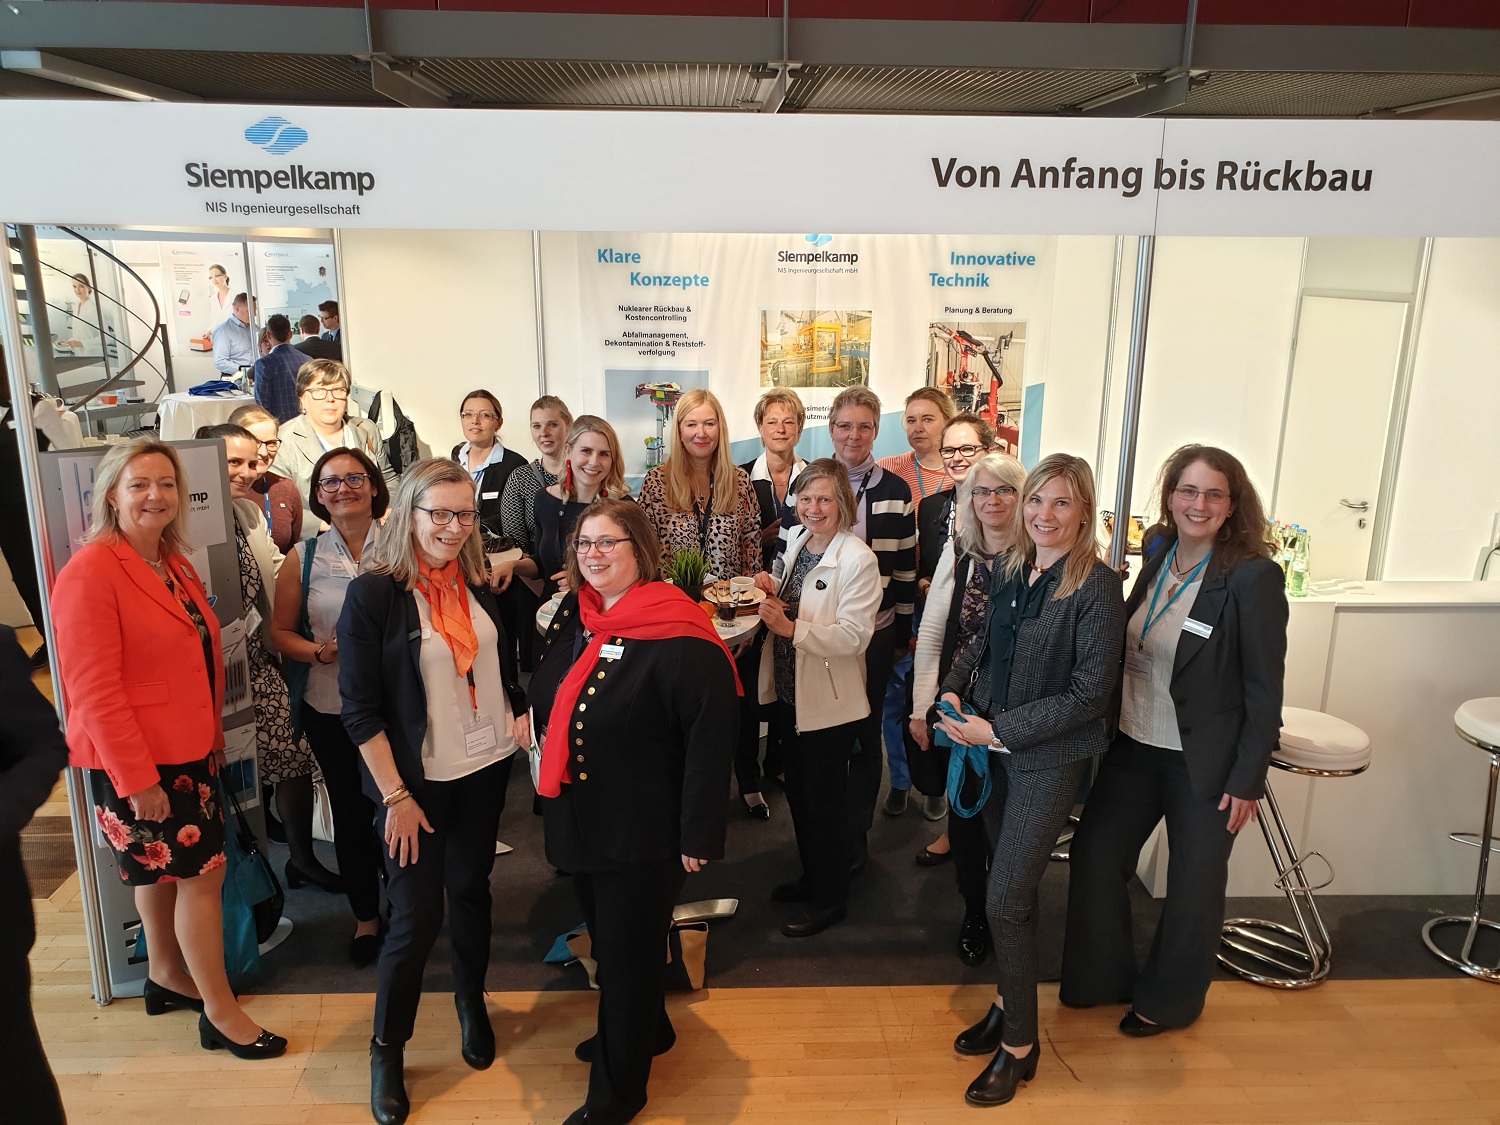 Meeting of the “Women in Nuclear” at the stand of Siempelkamp NIS, KONTEC 2019